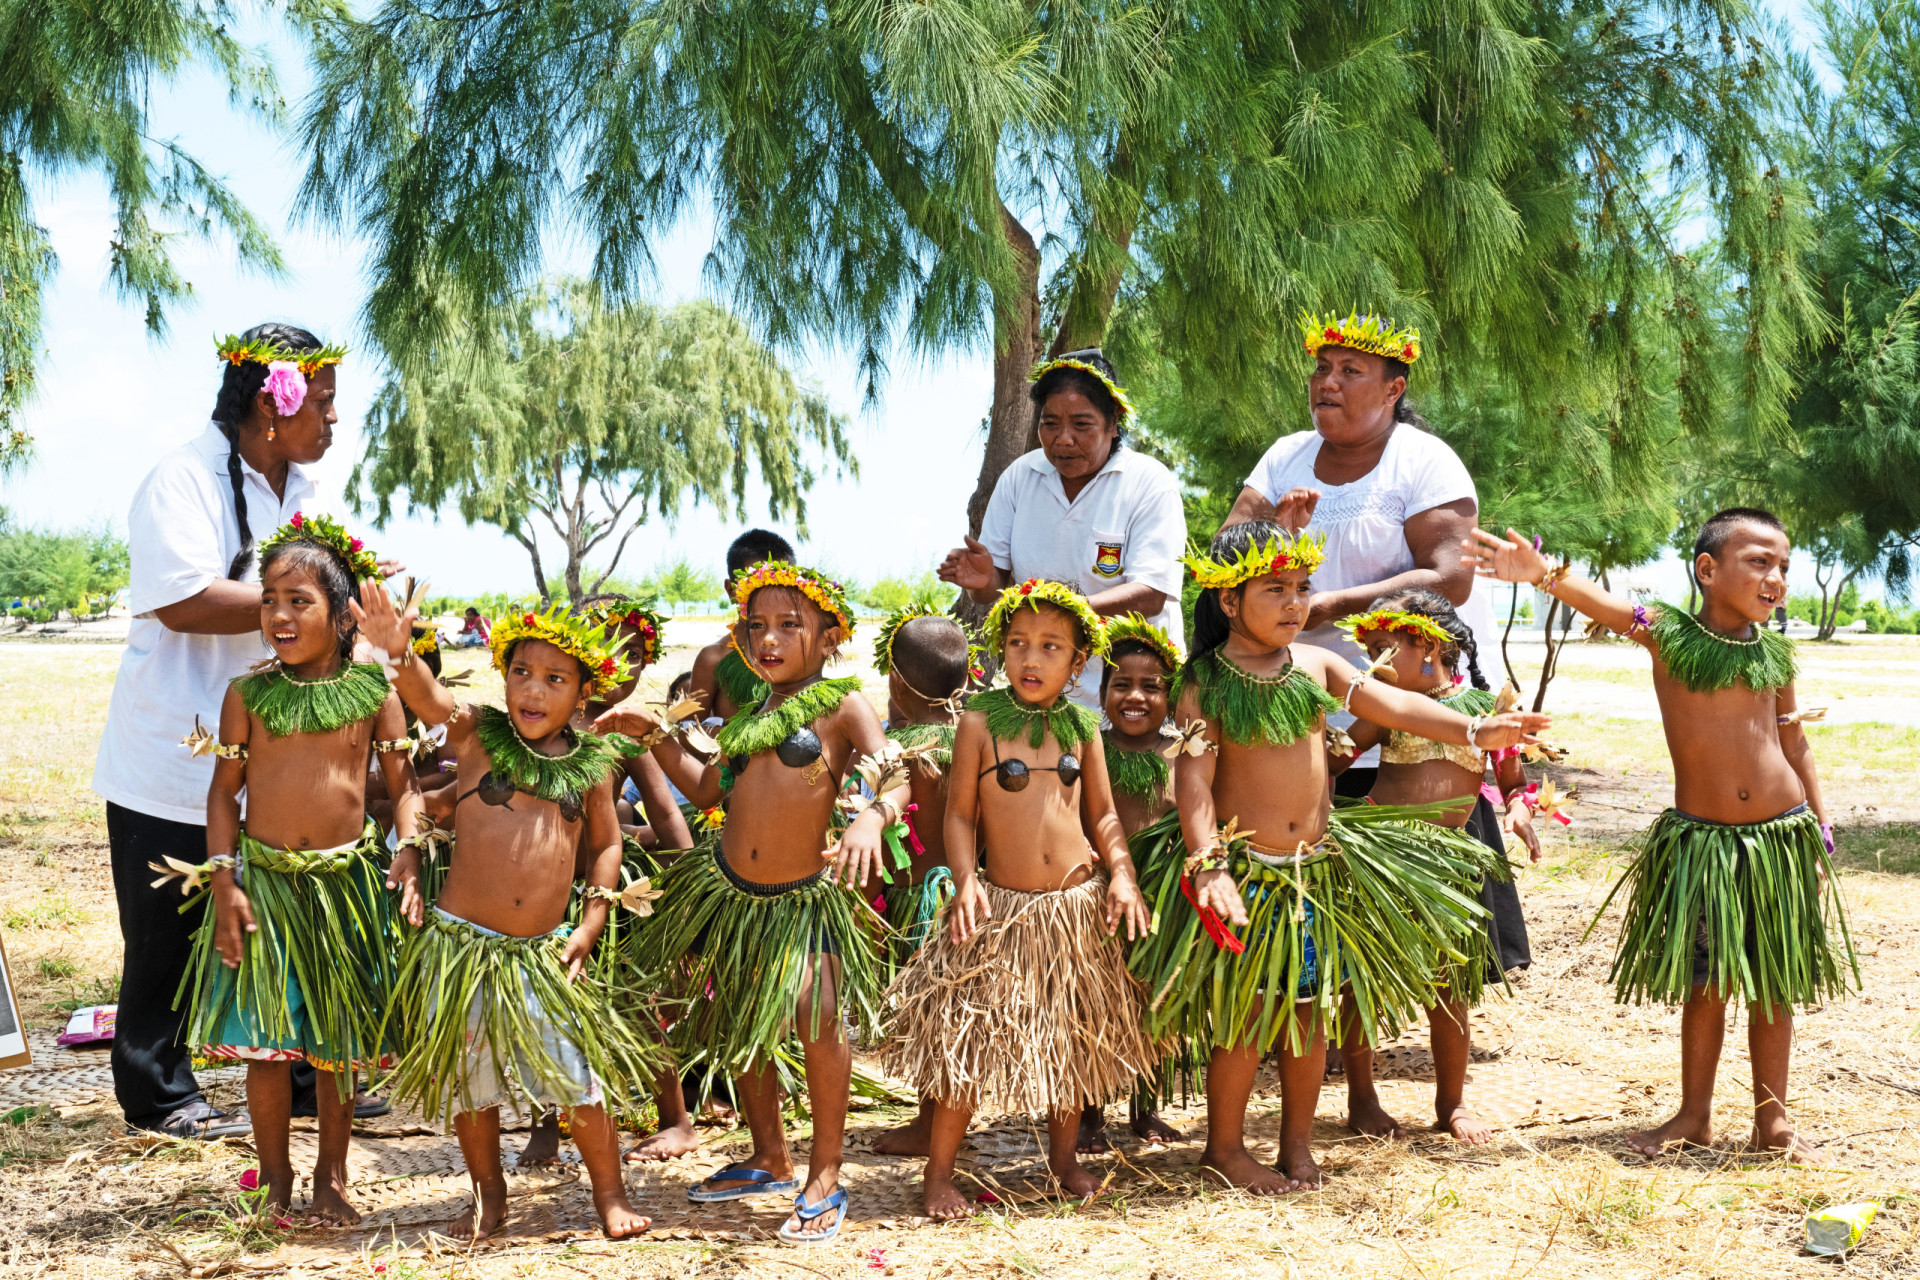 <p>Education in Kiribati is free and compulsory for children between the ages of six and 14. But while the primary school system is very well-attended, secondary and higher education faces challenges due to financial pressures.</p><p><a href="https://www.msn.com/en-us/community/channel/vid-7xx8mnucu55yw63we9va2gwr7uihbxwc68fxqp25x6tg4ftibpra?cvid=94631541bc0f4f89bfd59158d696ad7e">Follow us and access great exclusive content every day</a></p>